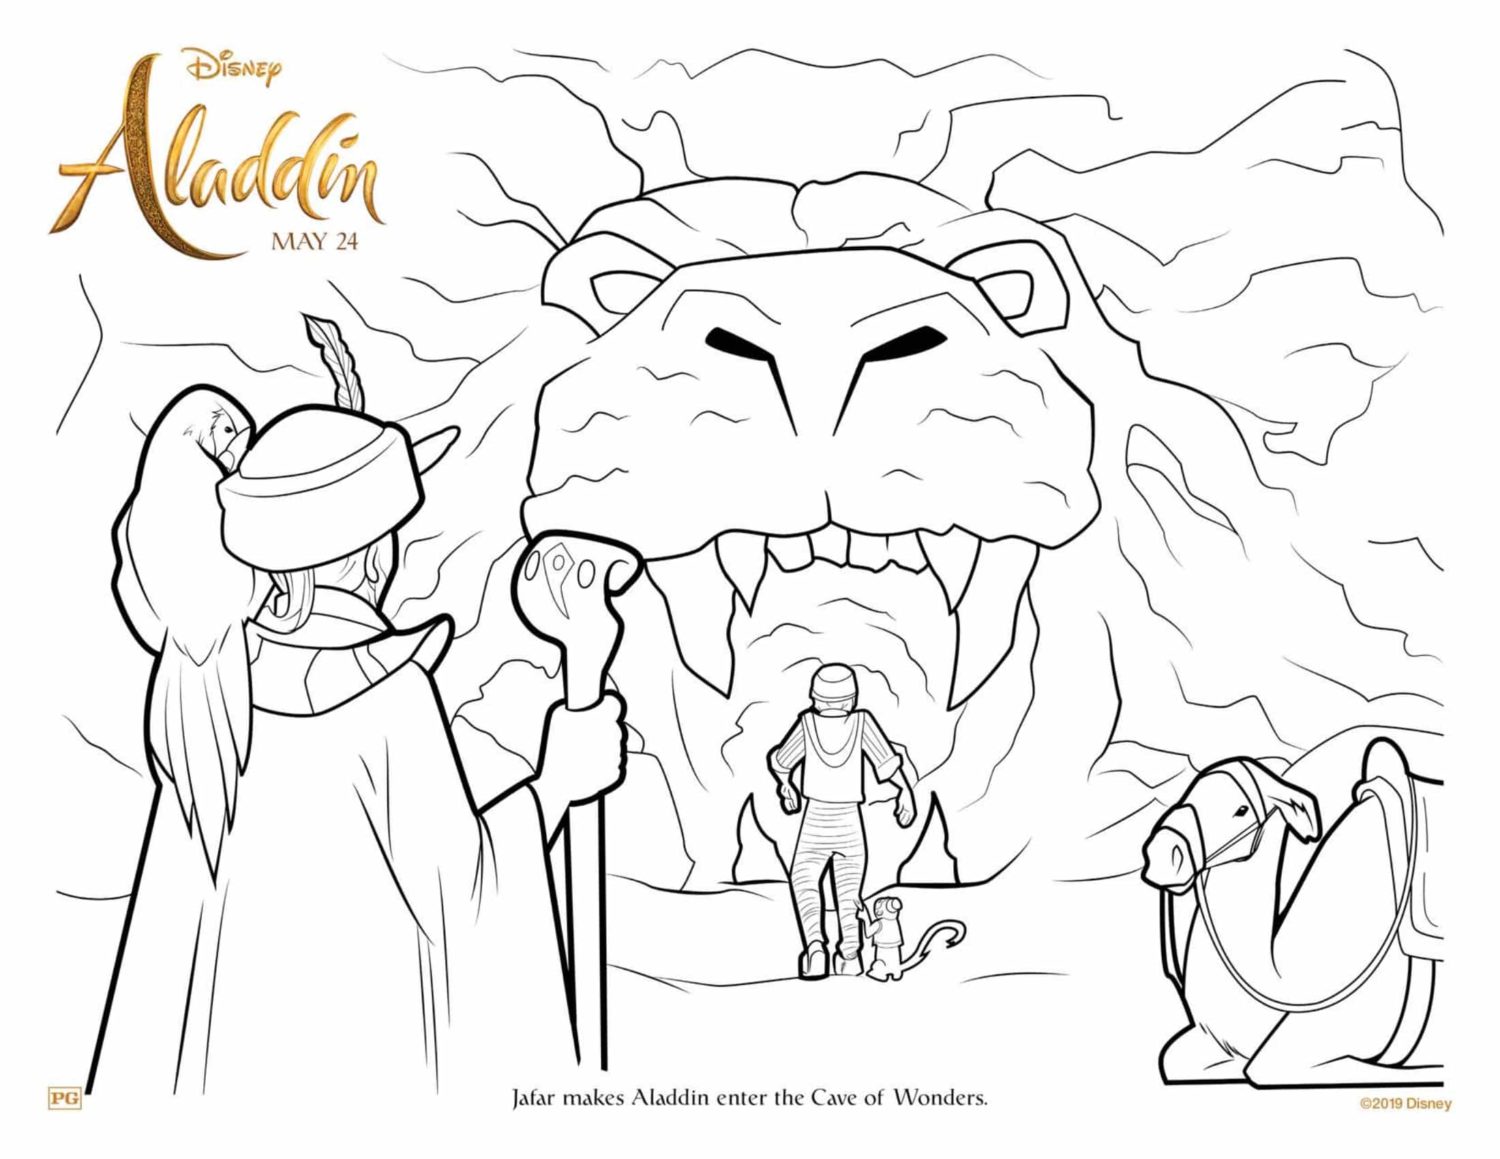 Aladdin Enters the Cave of Wonders Coloring Page and Activity Sheet